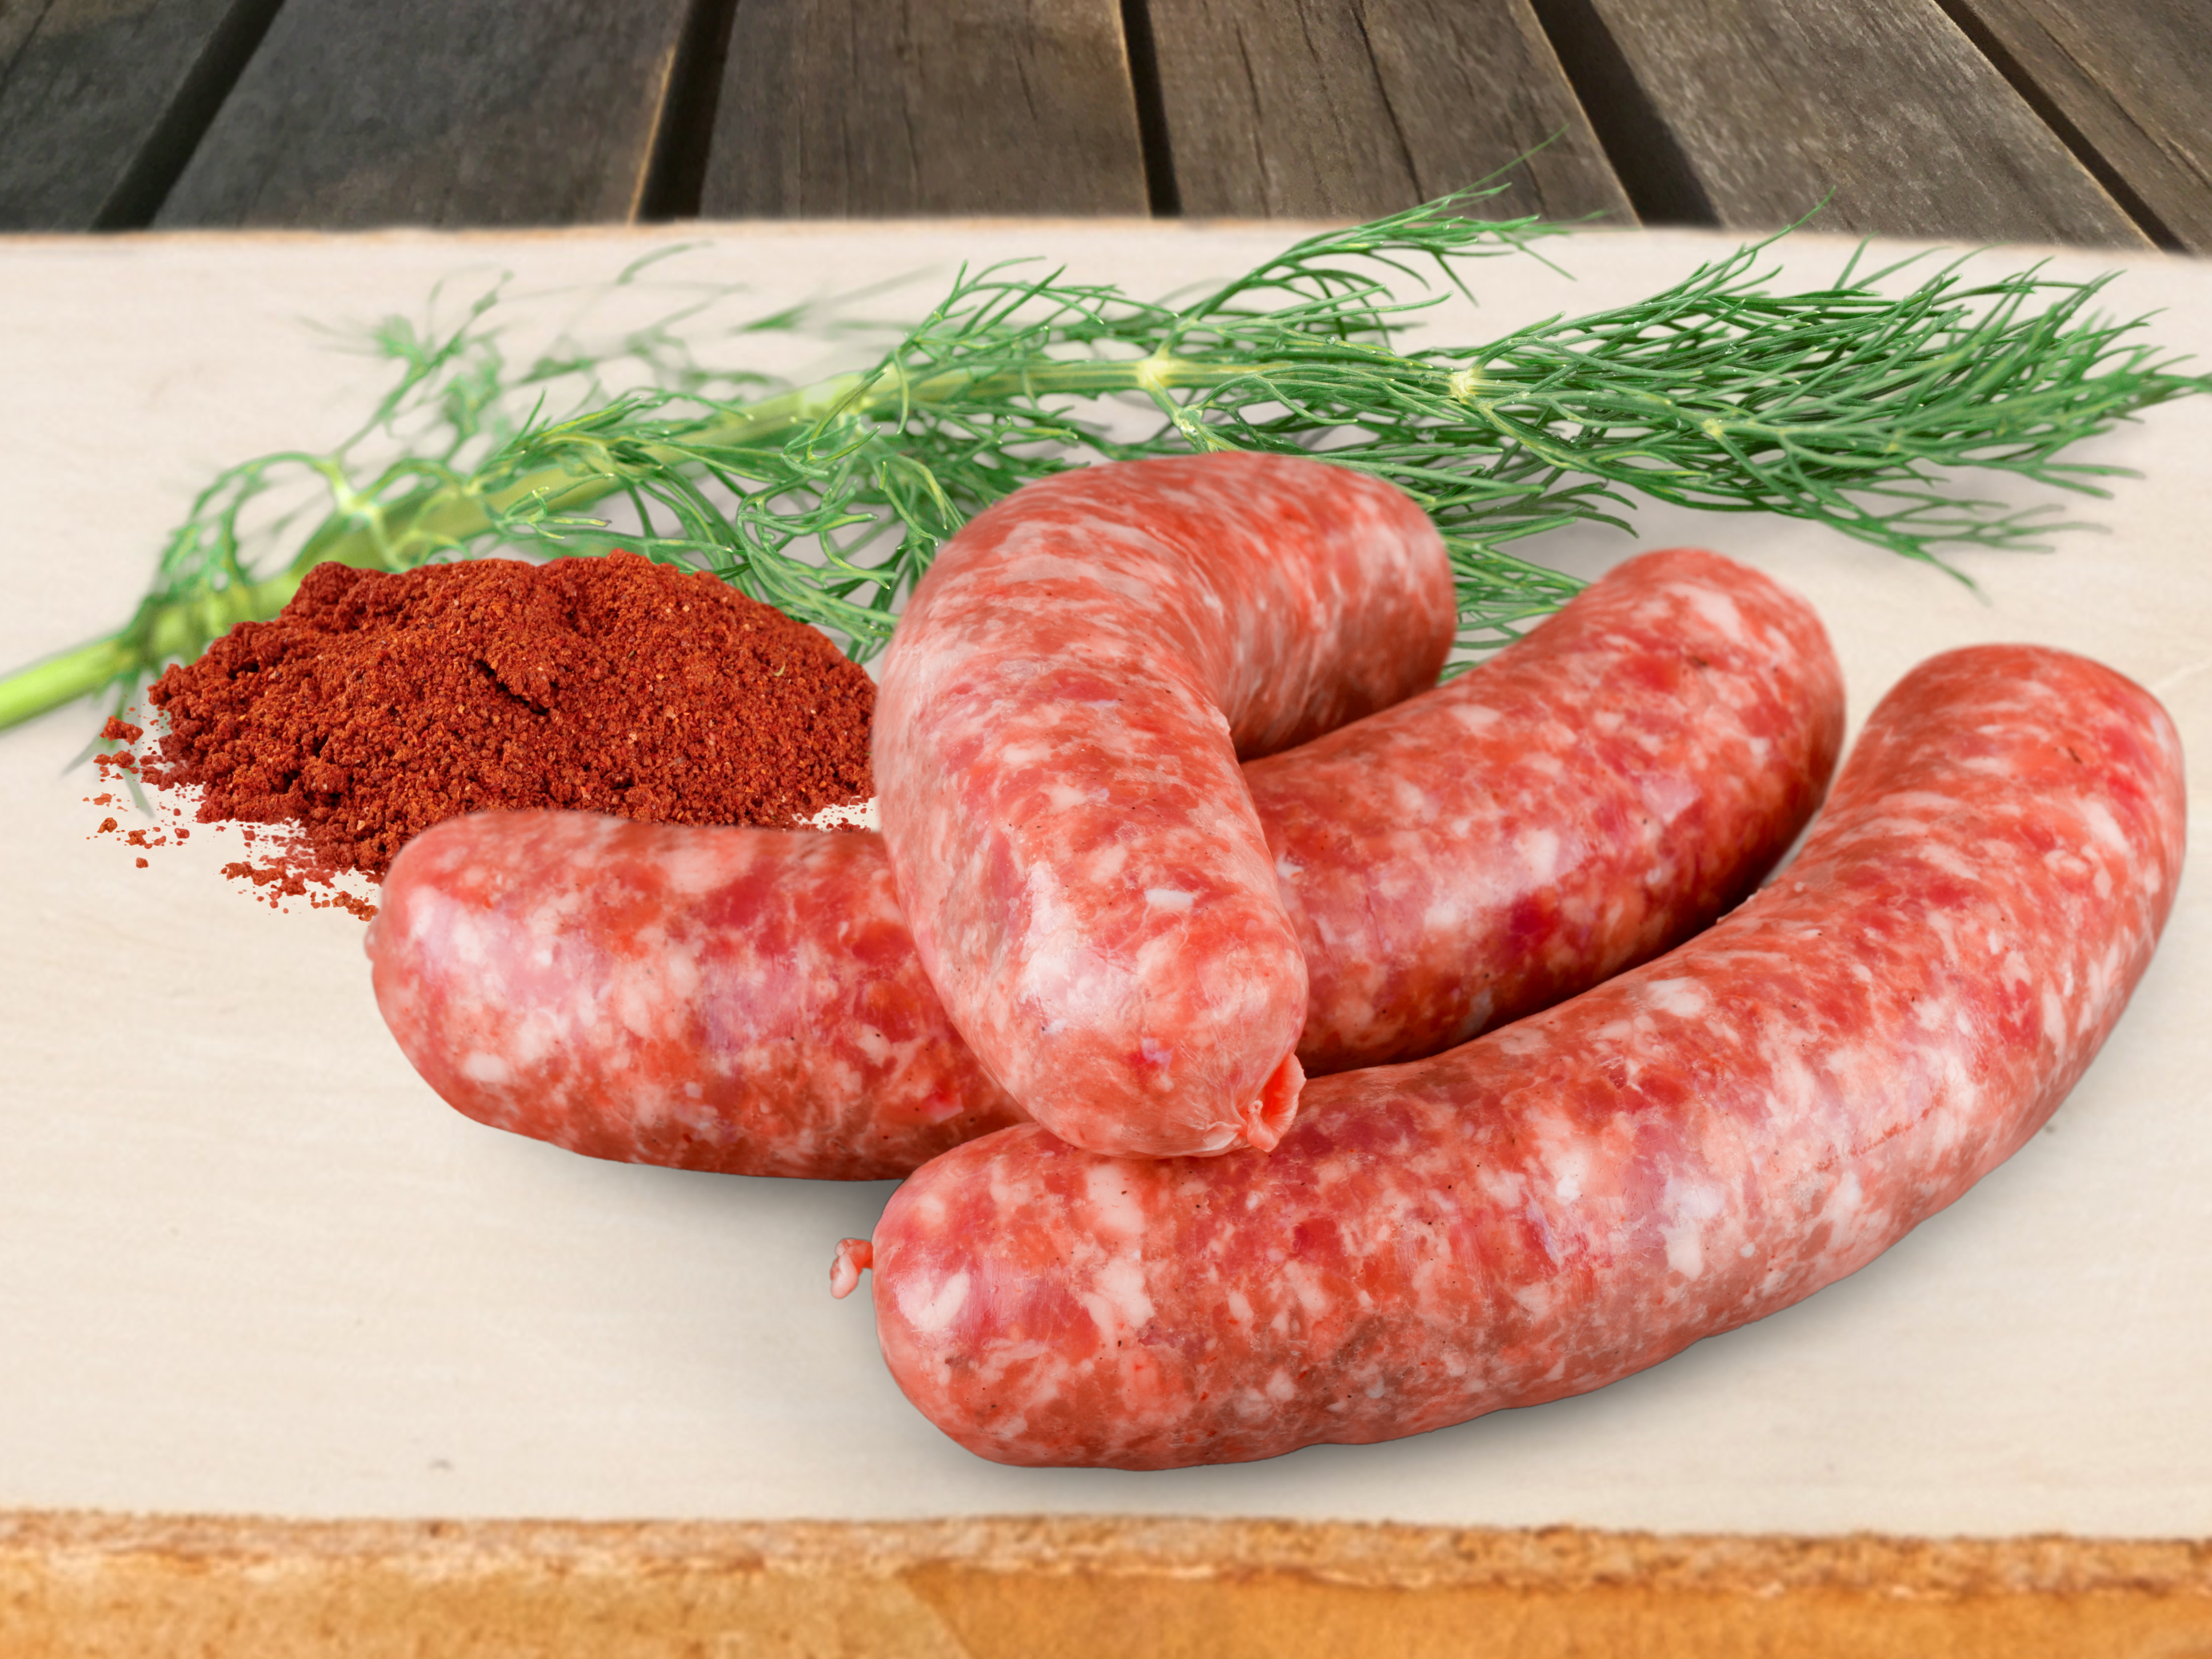 NEW YORKER SAUSAGE MIX 1.5KG PACK